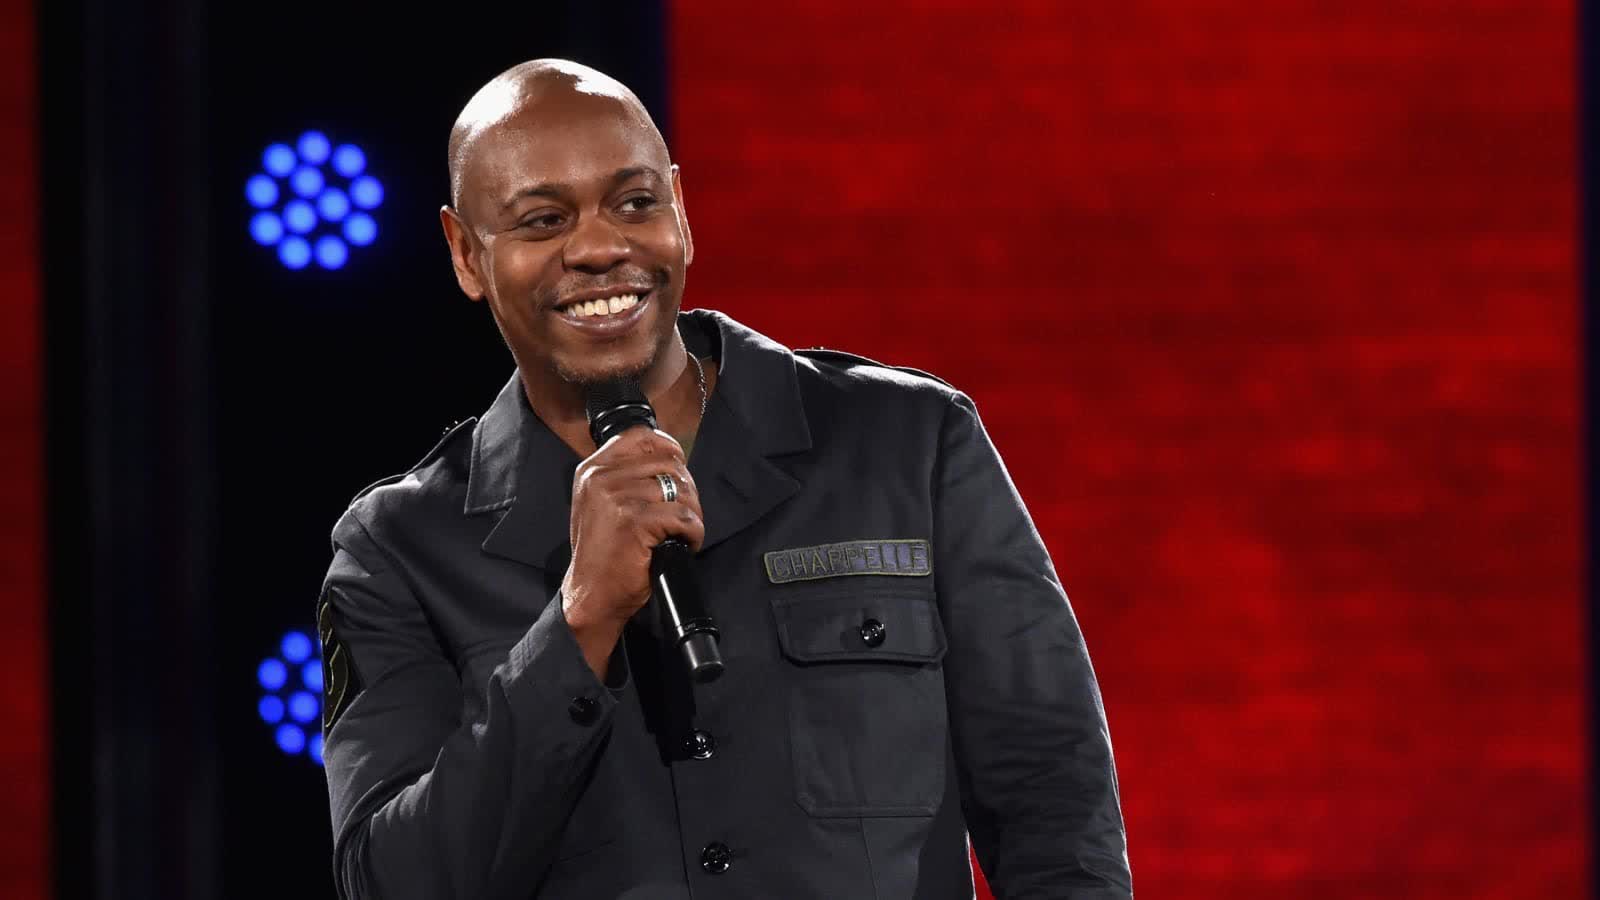 Dave Chappelle leads YouTube's top trending videos of 2020 list